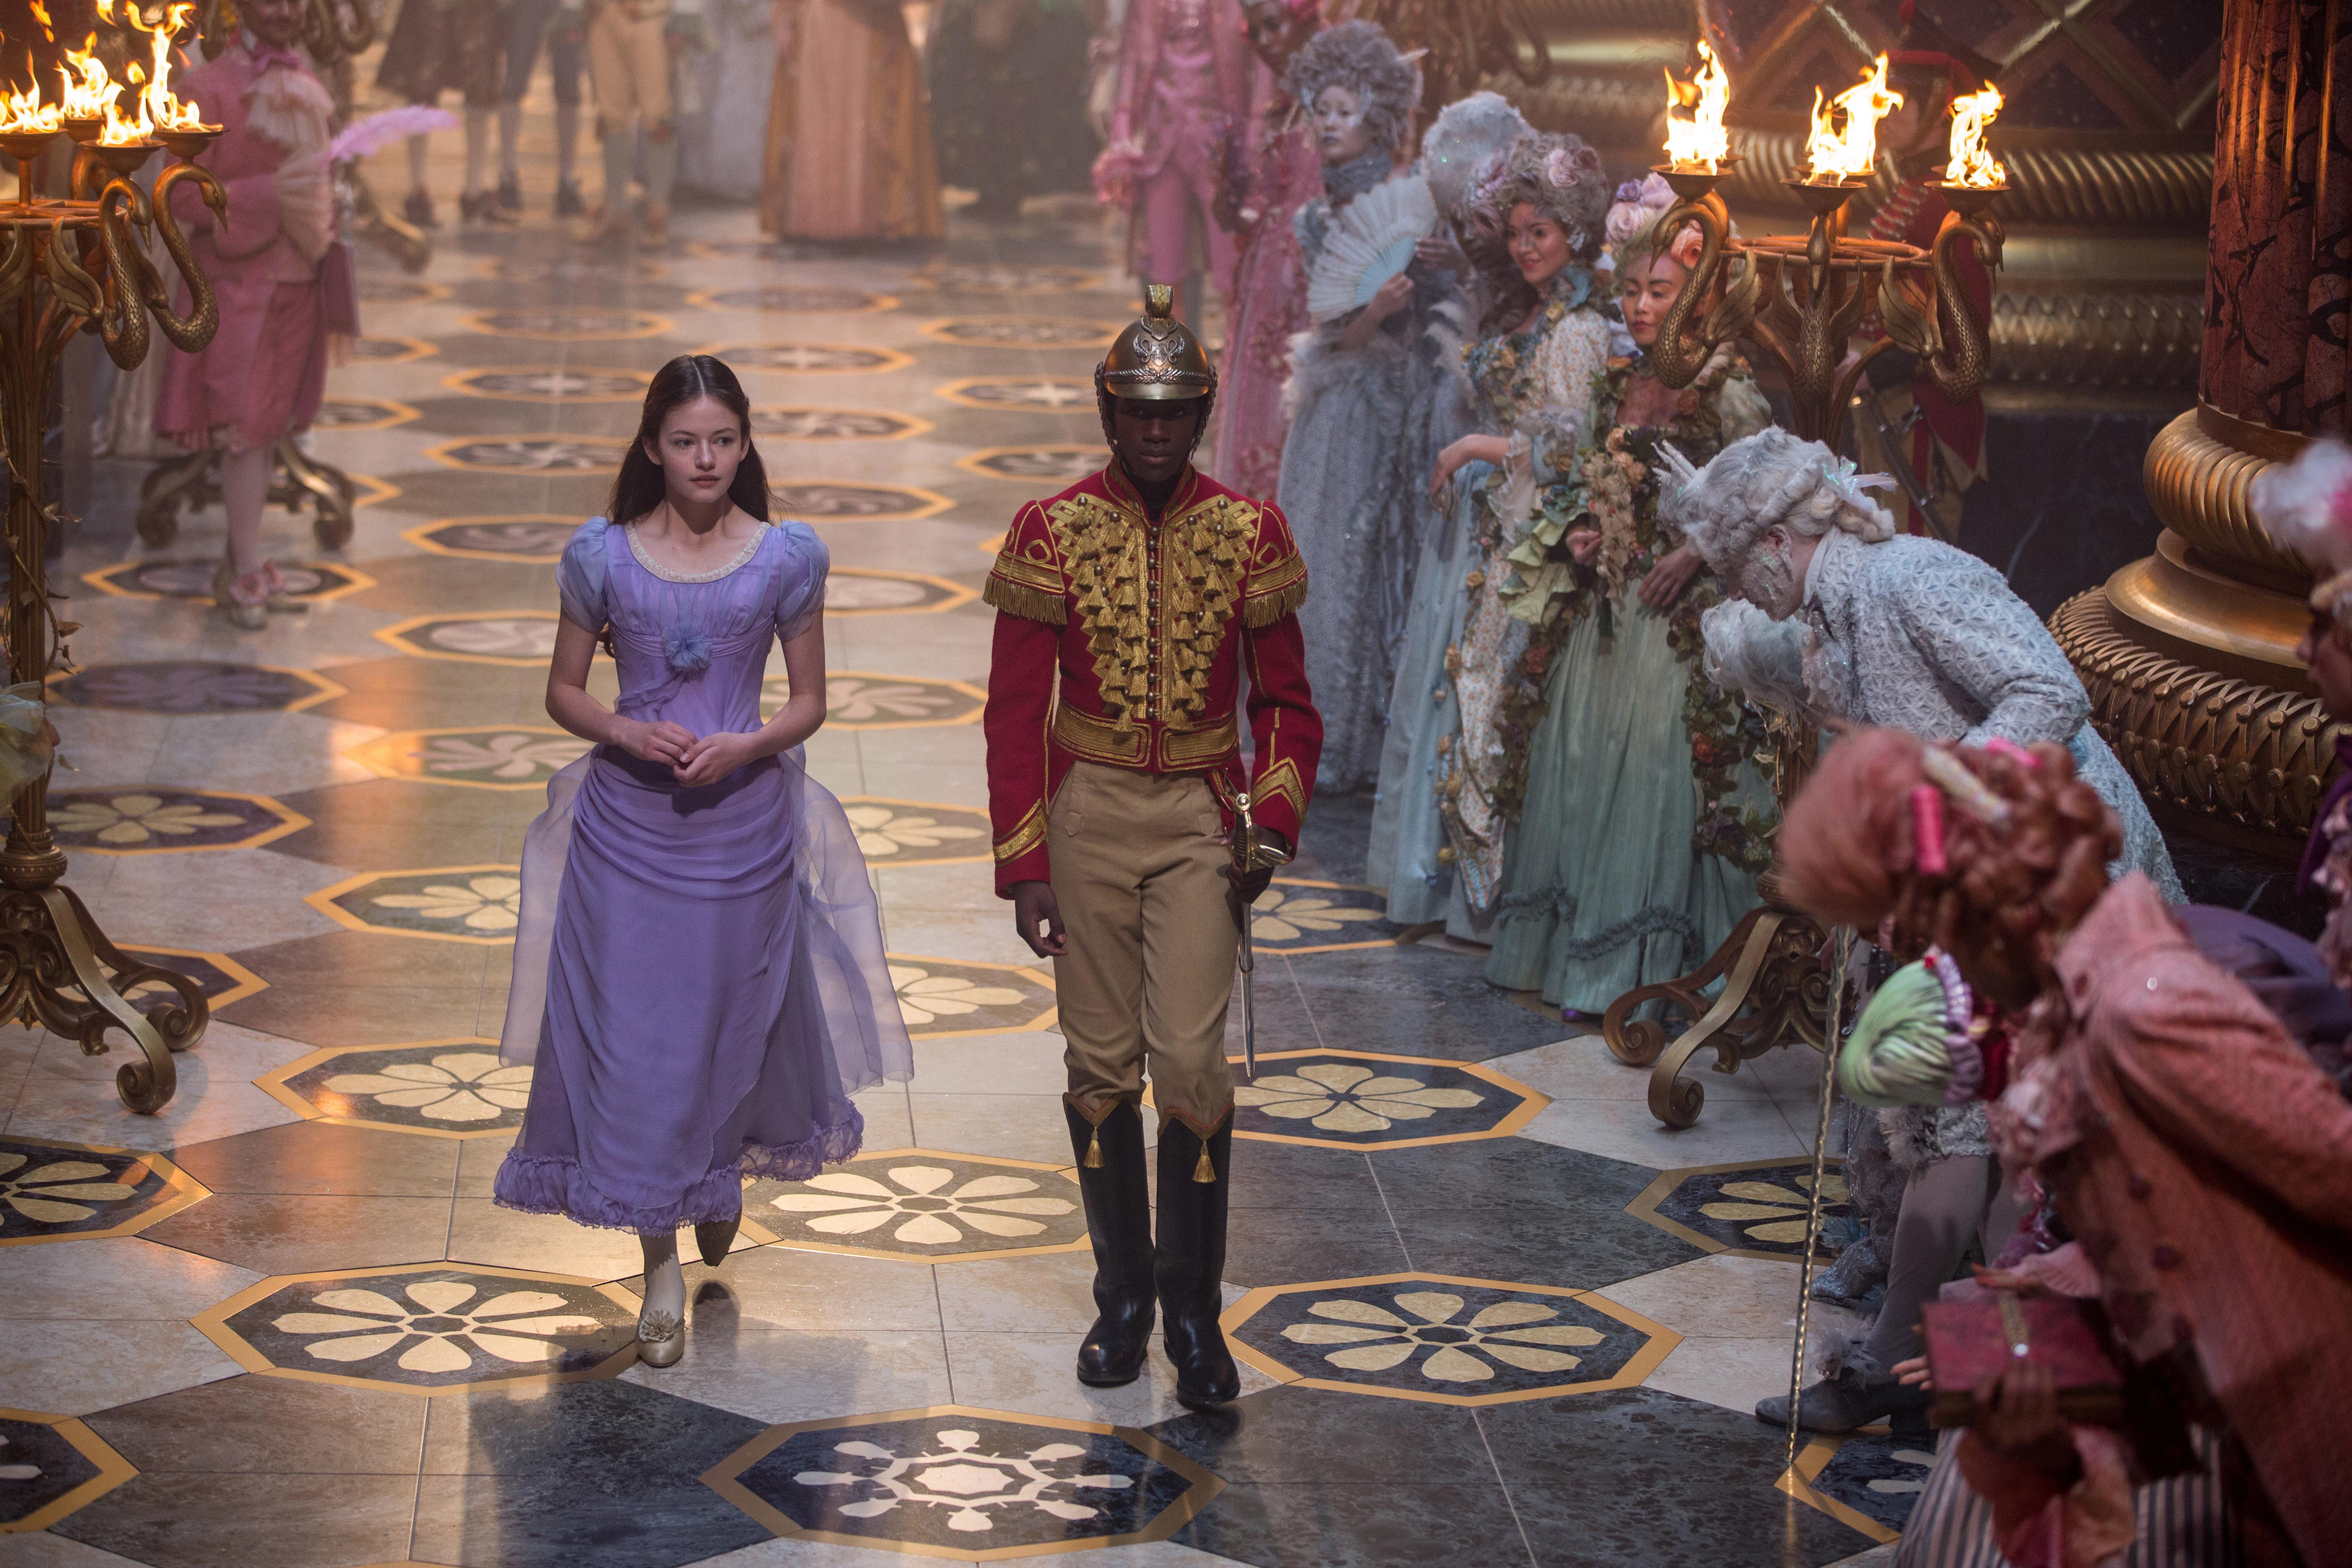 The Nutcracker And The Four Realms 2018 Mackenzie Foy 5k, HD Movies, 4k Wallpapers ...5760 x 3840